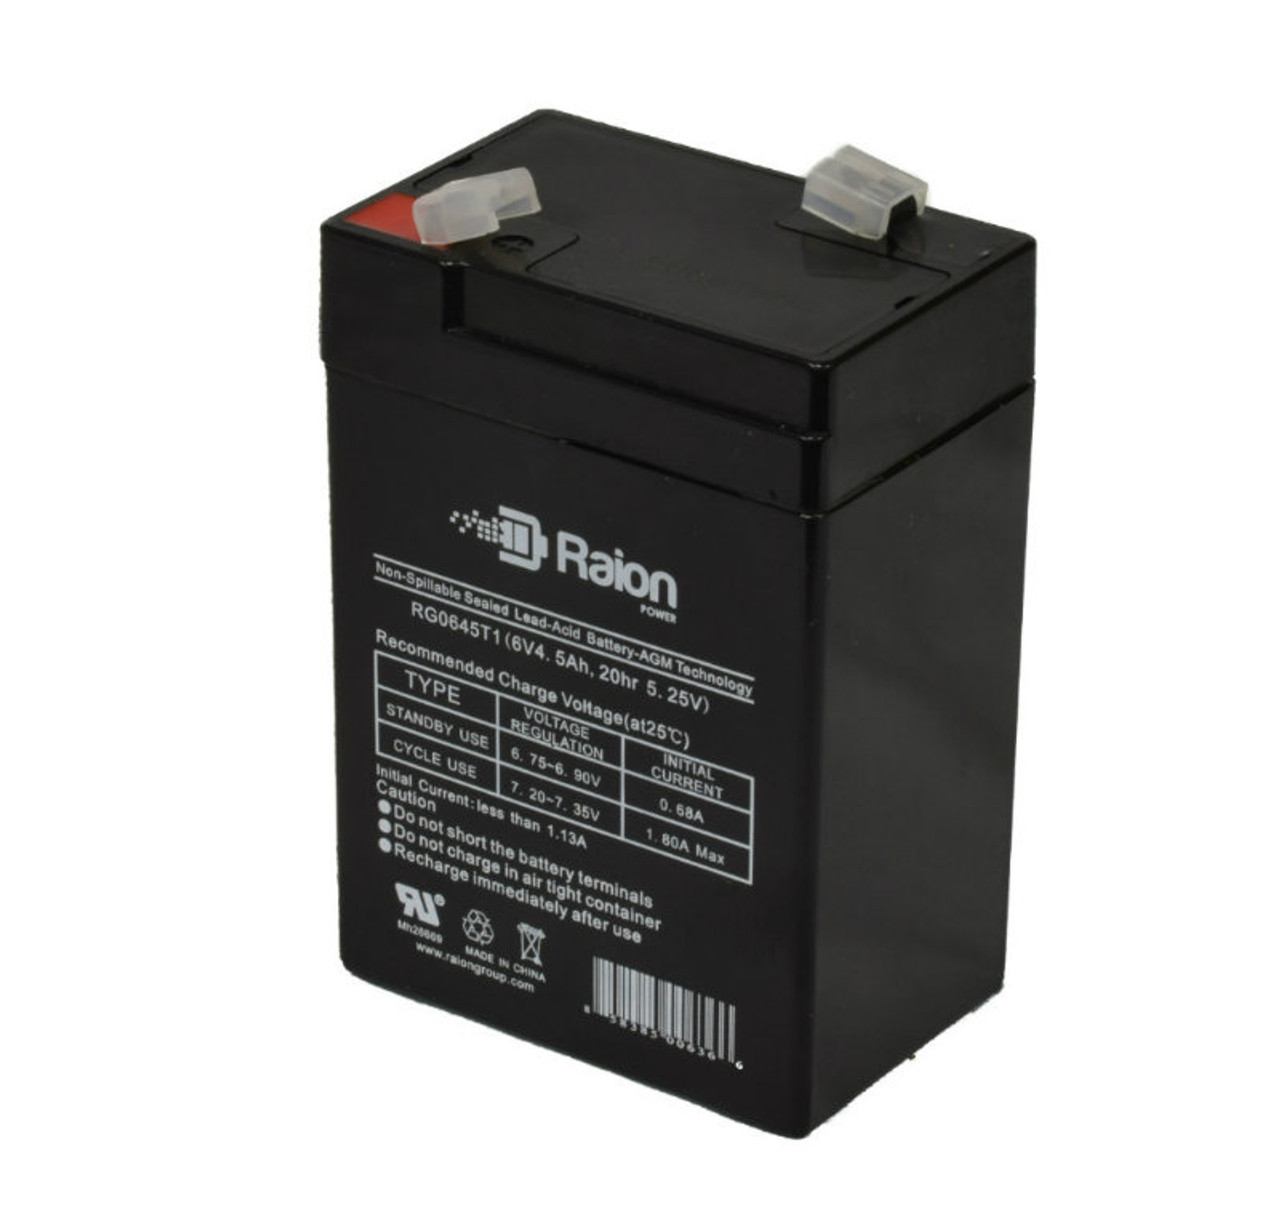 Raion Power RG0645T1 6V 4.5Ah Replacement Battery Cartridge for Teledyne 1180005